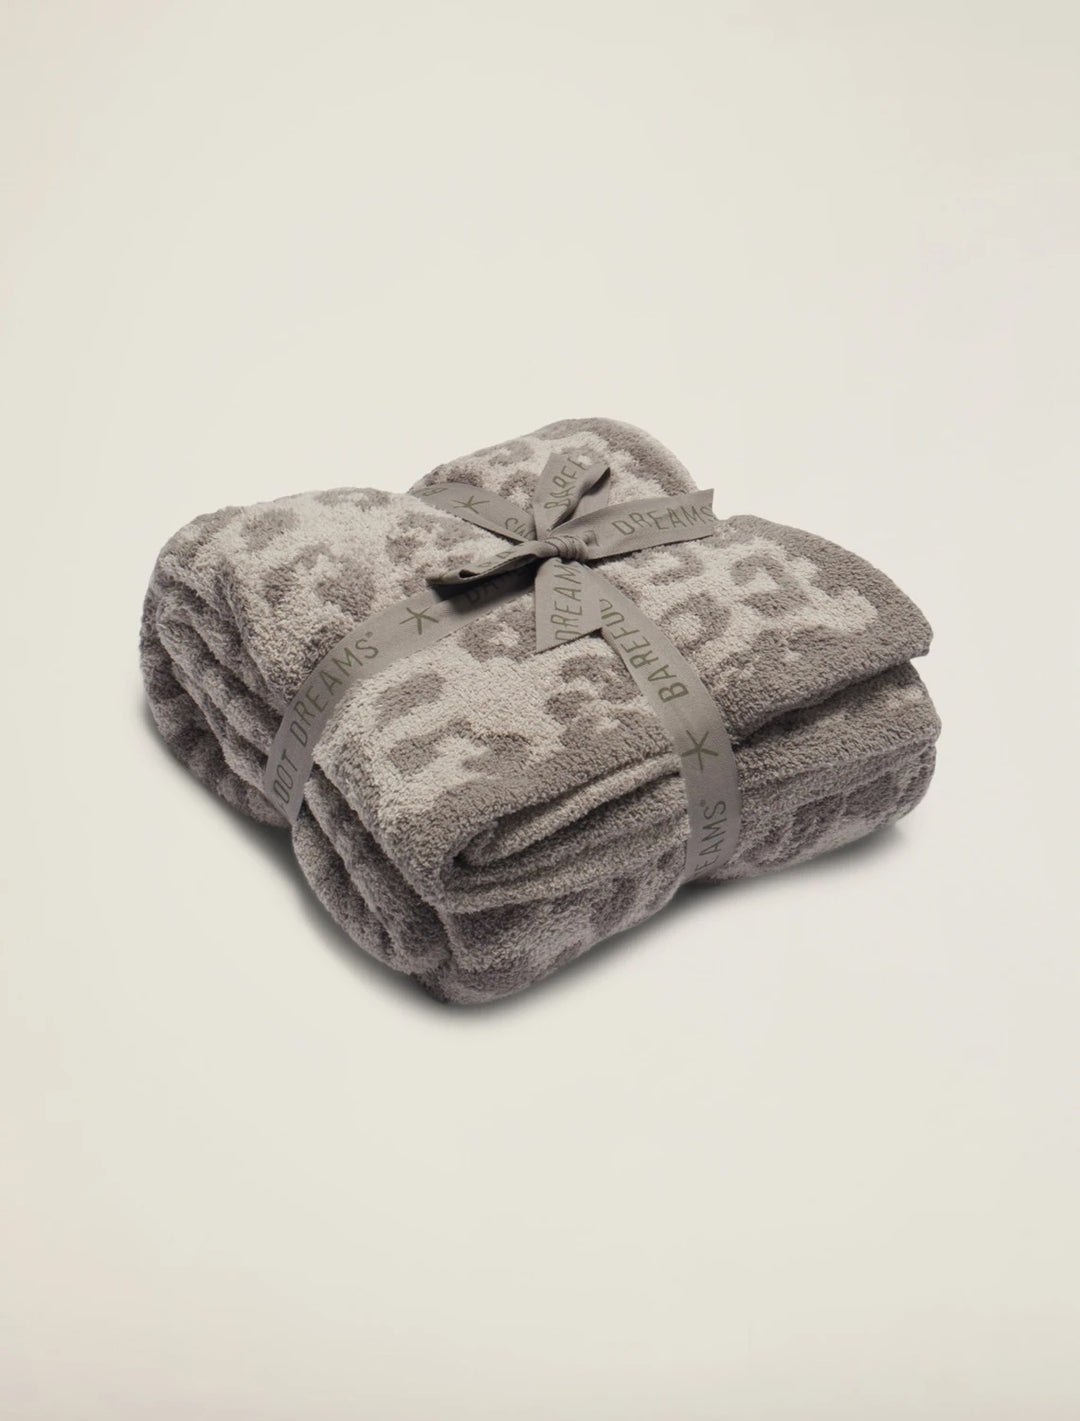 Barefoot Dreams - Cozychic Barefoot in the Wild Adult Throw in Linen/Warm Gray Leopard